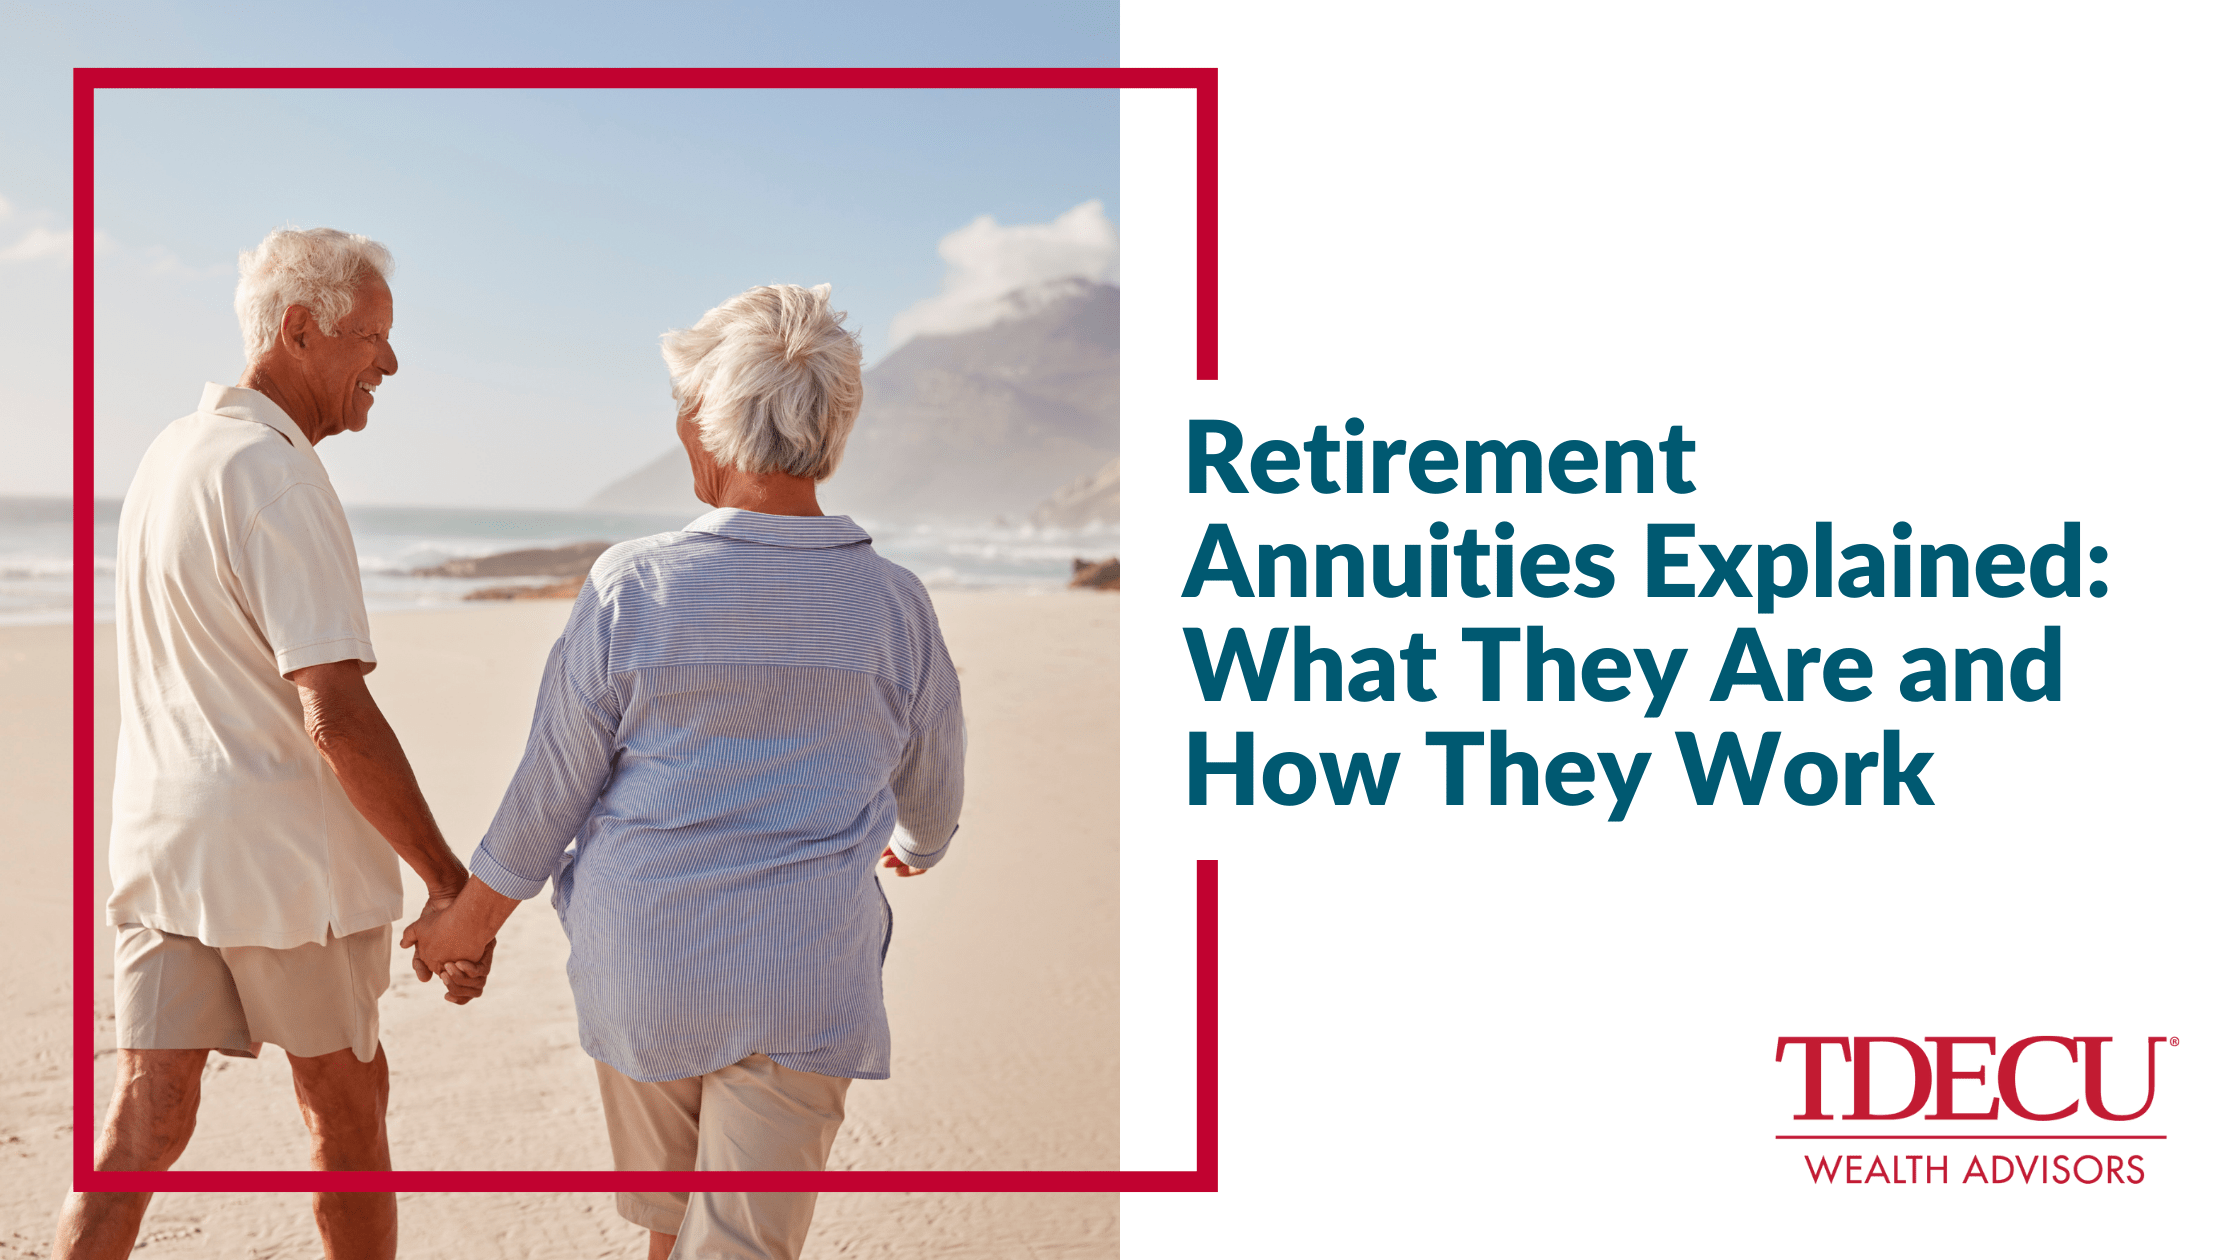 Retirement Annuities Explained: What They Are and How They Work